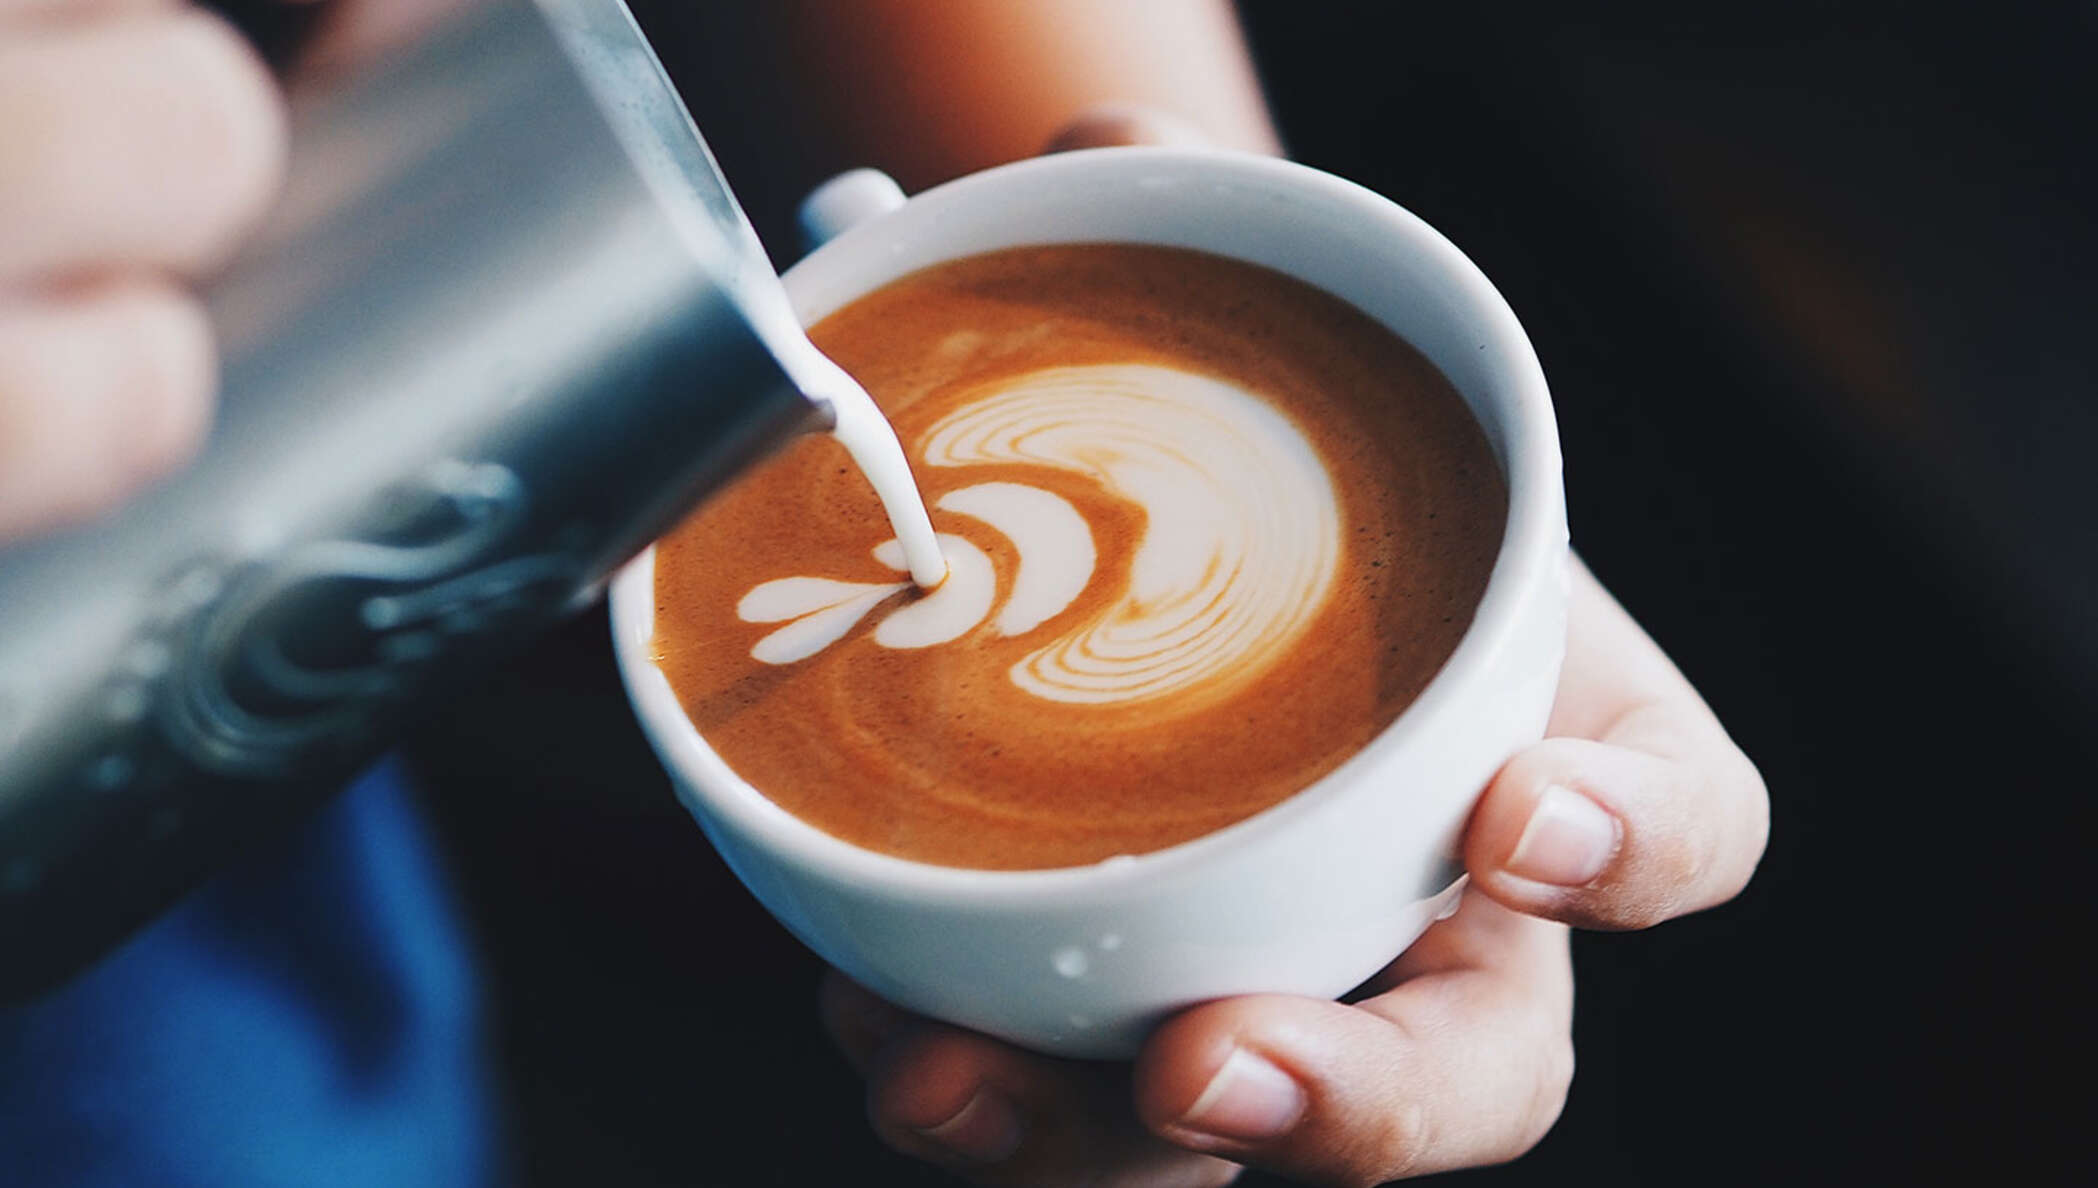 Close-up of hand holding a coffee cup.